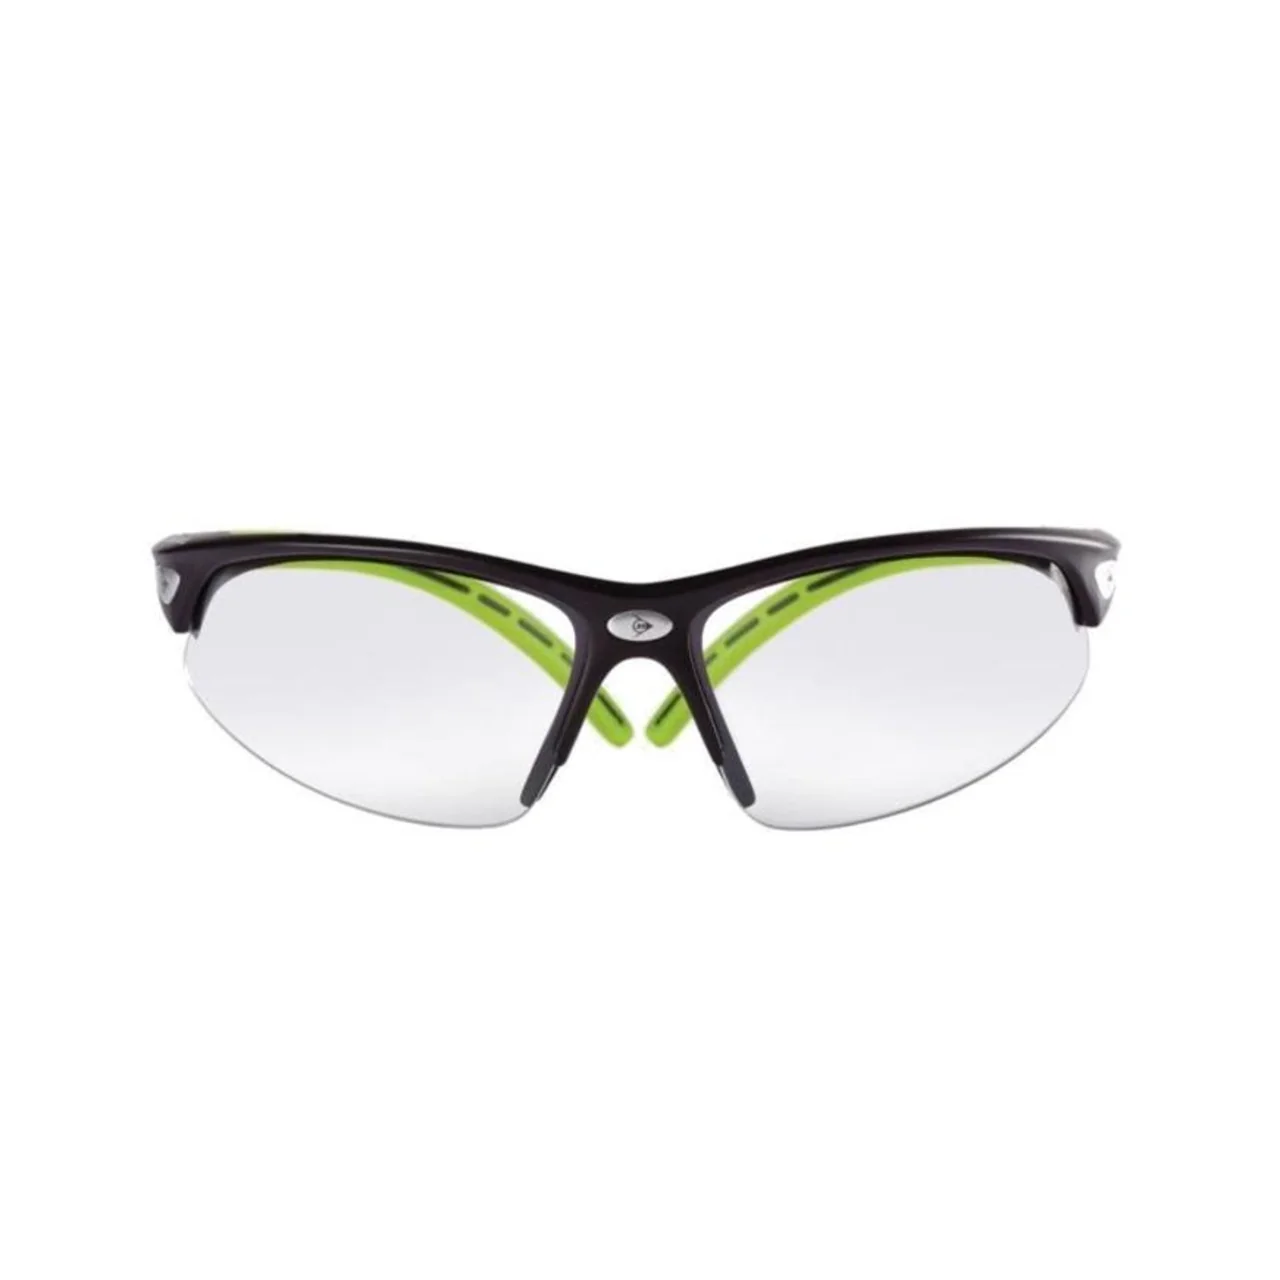 Dunlop I-Armour Protective Glasses Black/Green